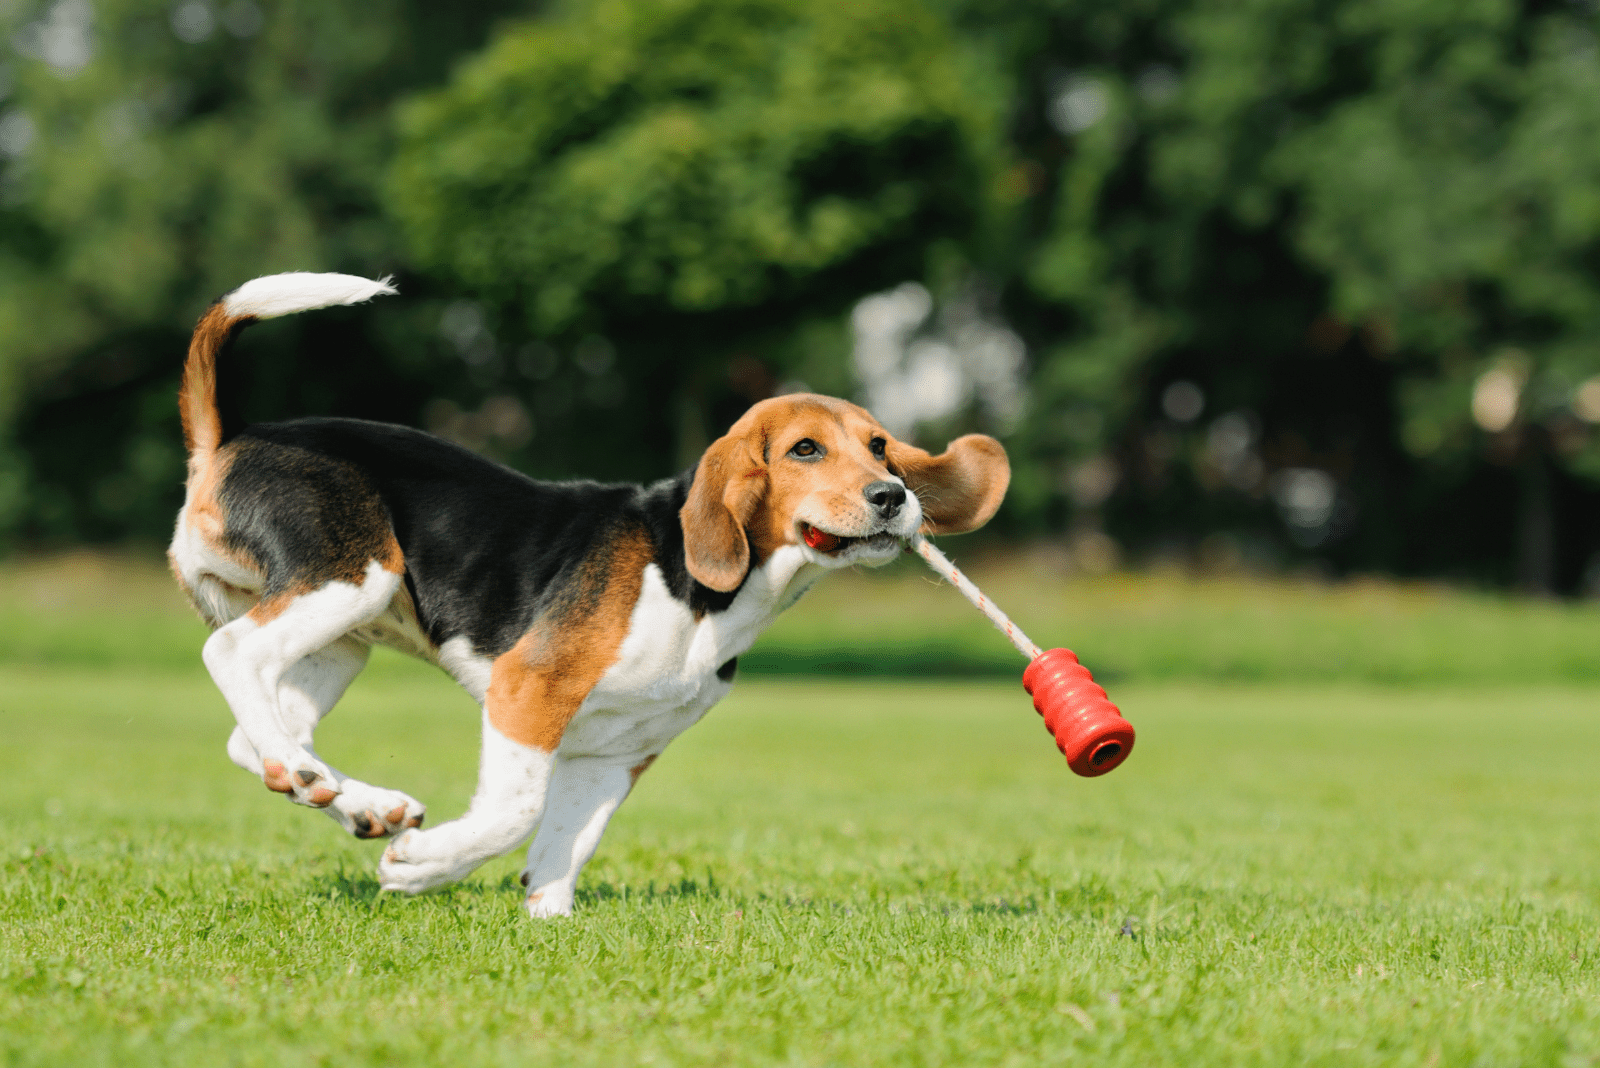 Red-Black Beagle runs in the field and plays with a toy